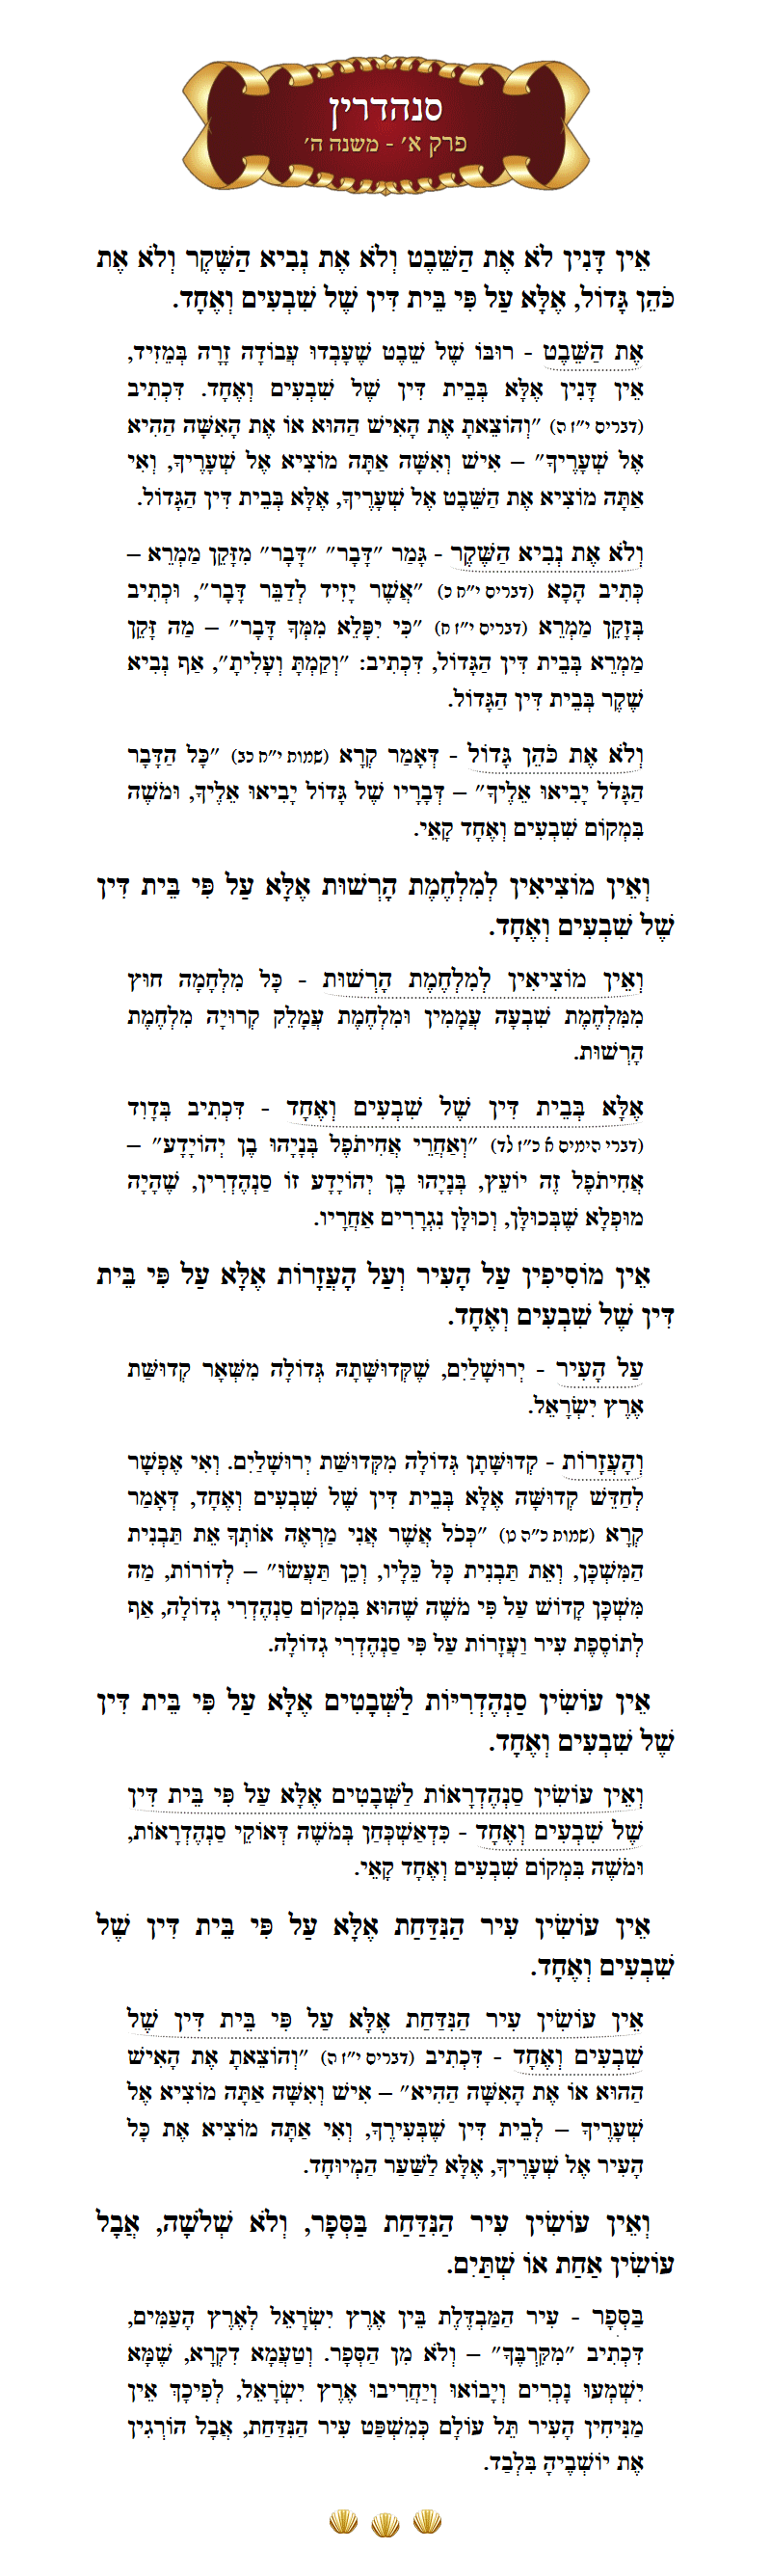 Masechta Sanhedrin Chapter 1 Mishnah 5 with commentary